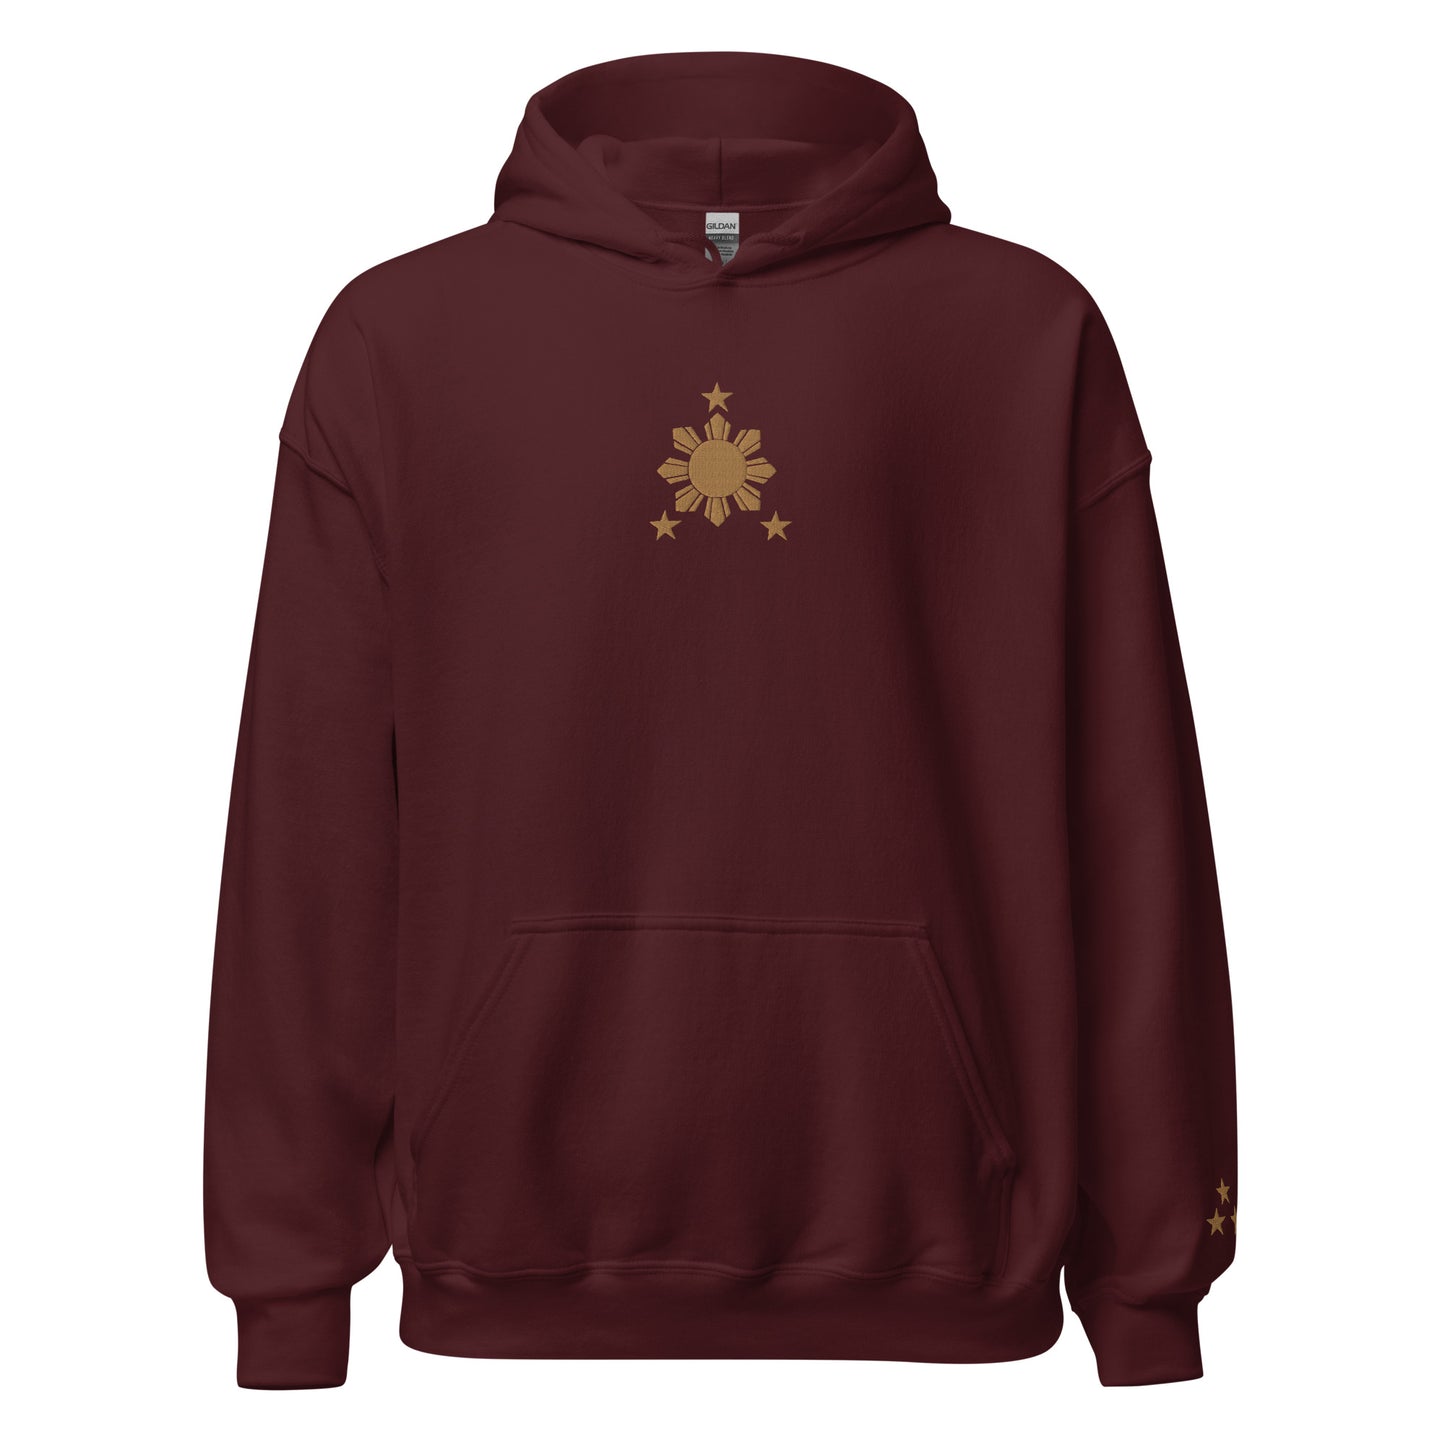 Filipino Hoodie Stars and Sun Embroidered Merch in color variant Maroon